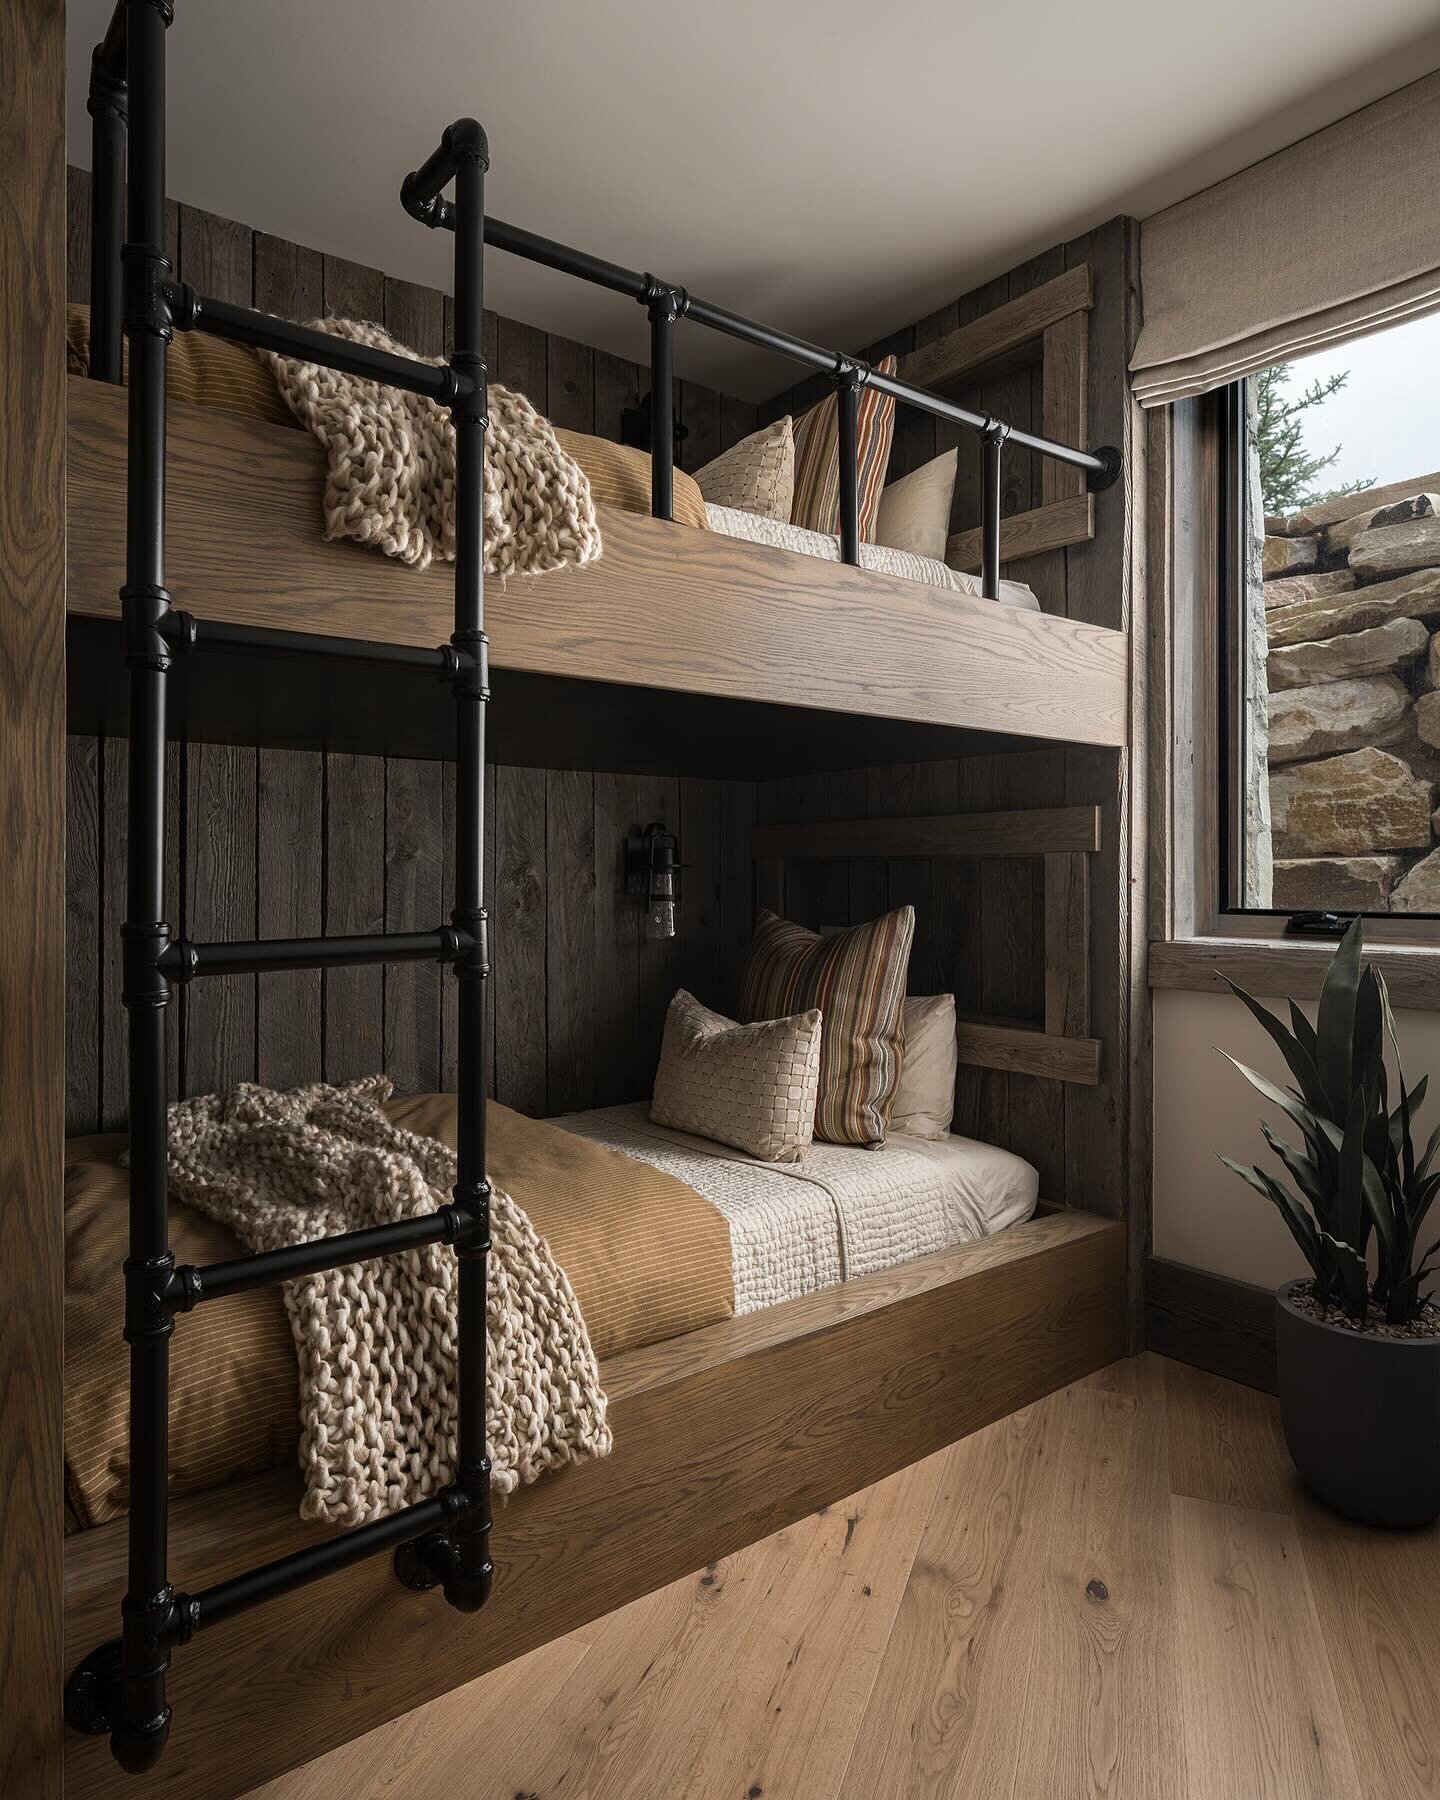 It&rsquo;s Thanksgiving week!  Who&rsquo;s got company coming? 
.
#kccinchway 
.
Lens: @joshwacaldwell 
Contractor: @killowenconstruction 
Interior Design: @kimberlyparkerdesign 
.
#bunkbeds #company #guests #makeroom #builtinbed #bunks #rustic #cabi